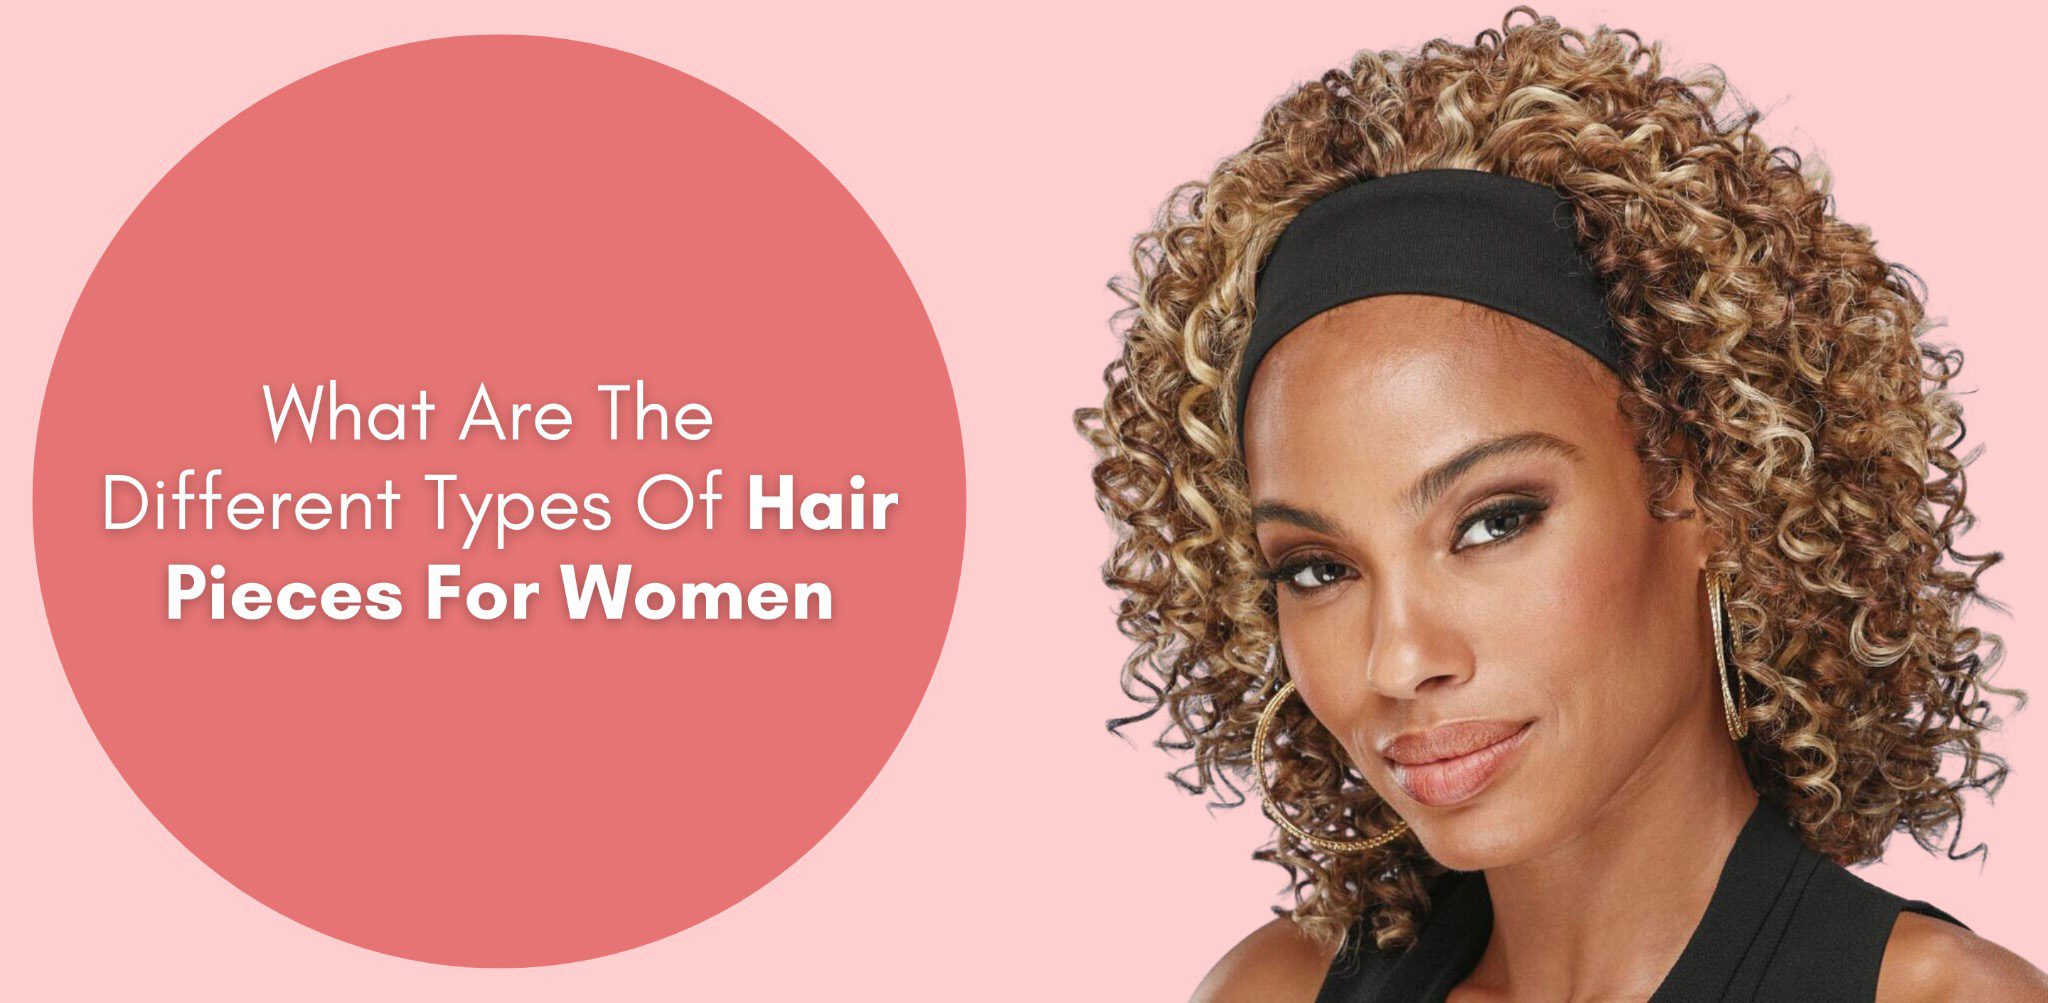 What Are The Different Types Of Hair Pieces For Women?